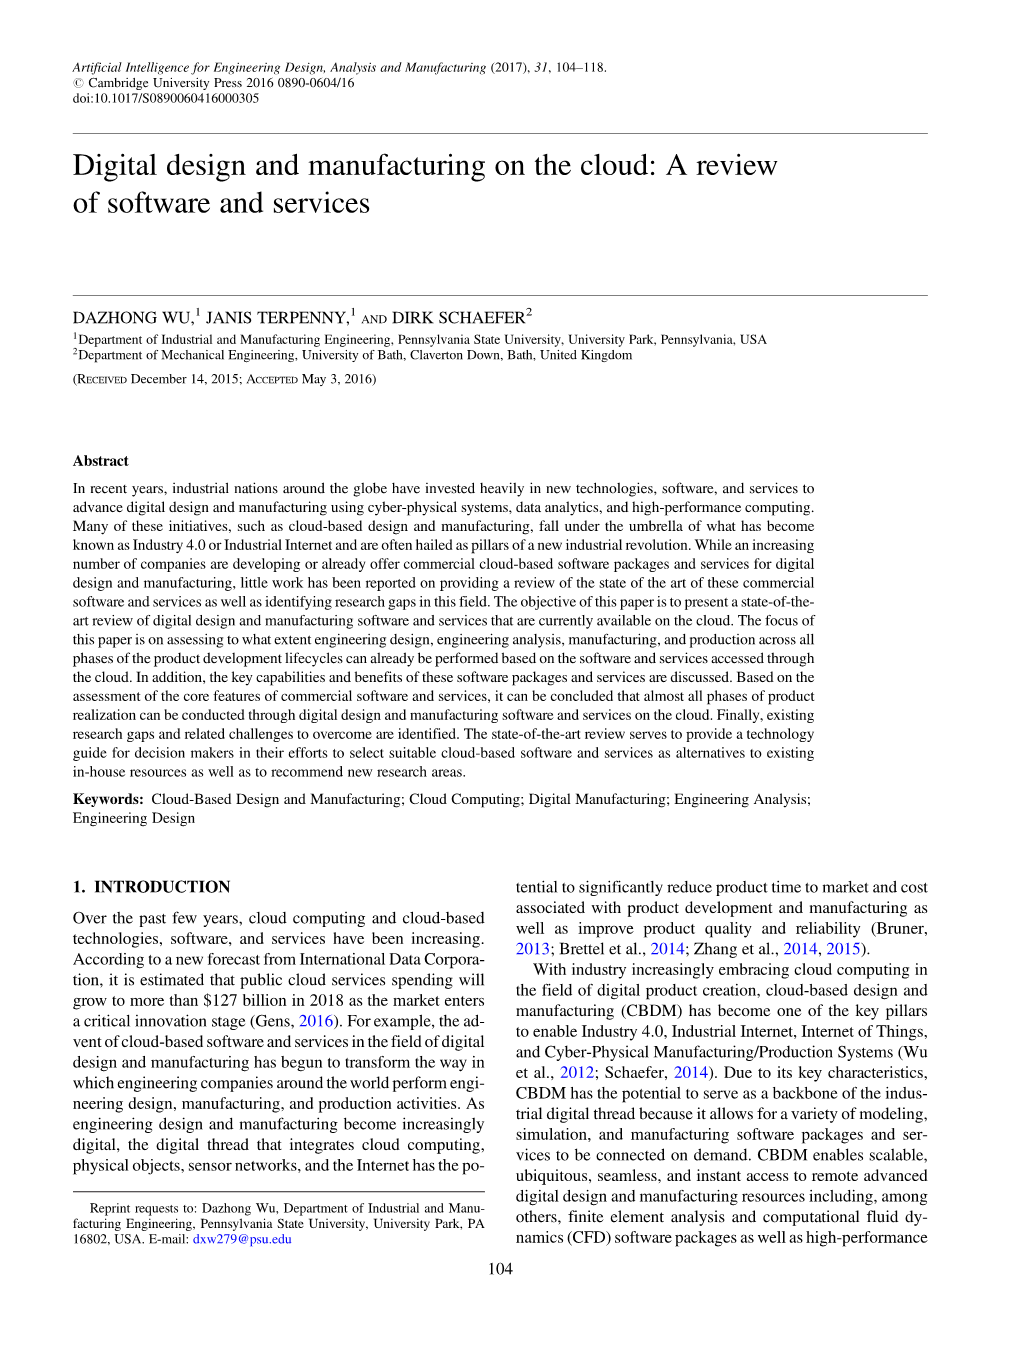 Digital Design and Manufacturing on the Cloud: a Review of Software and Services